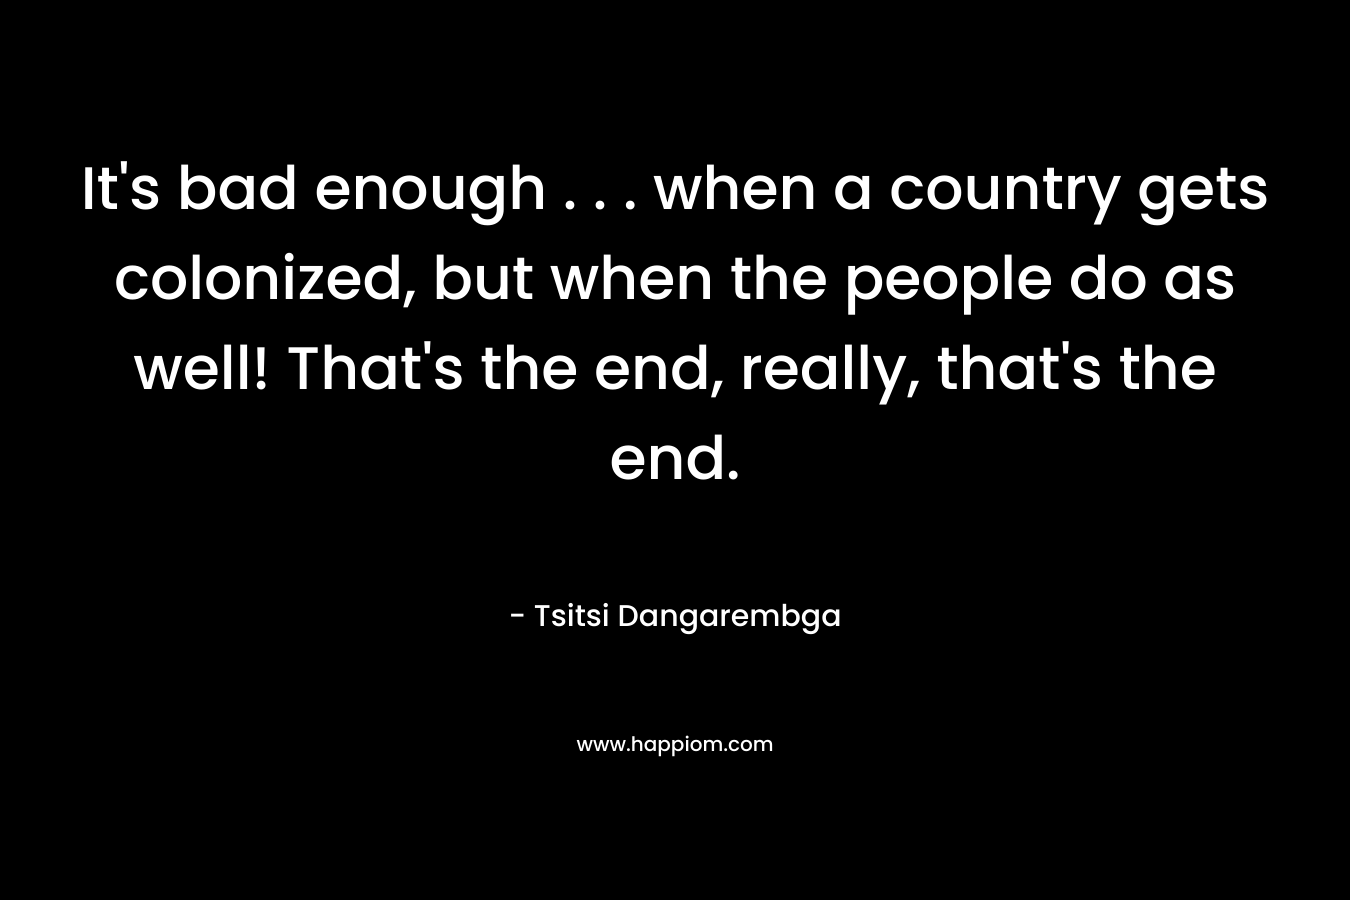 It’s bad enough . . . when a country gets colonized, but when the people do as well! That’s the end, really, that’s the end. – Tsitsi Dangarembga